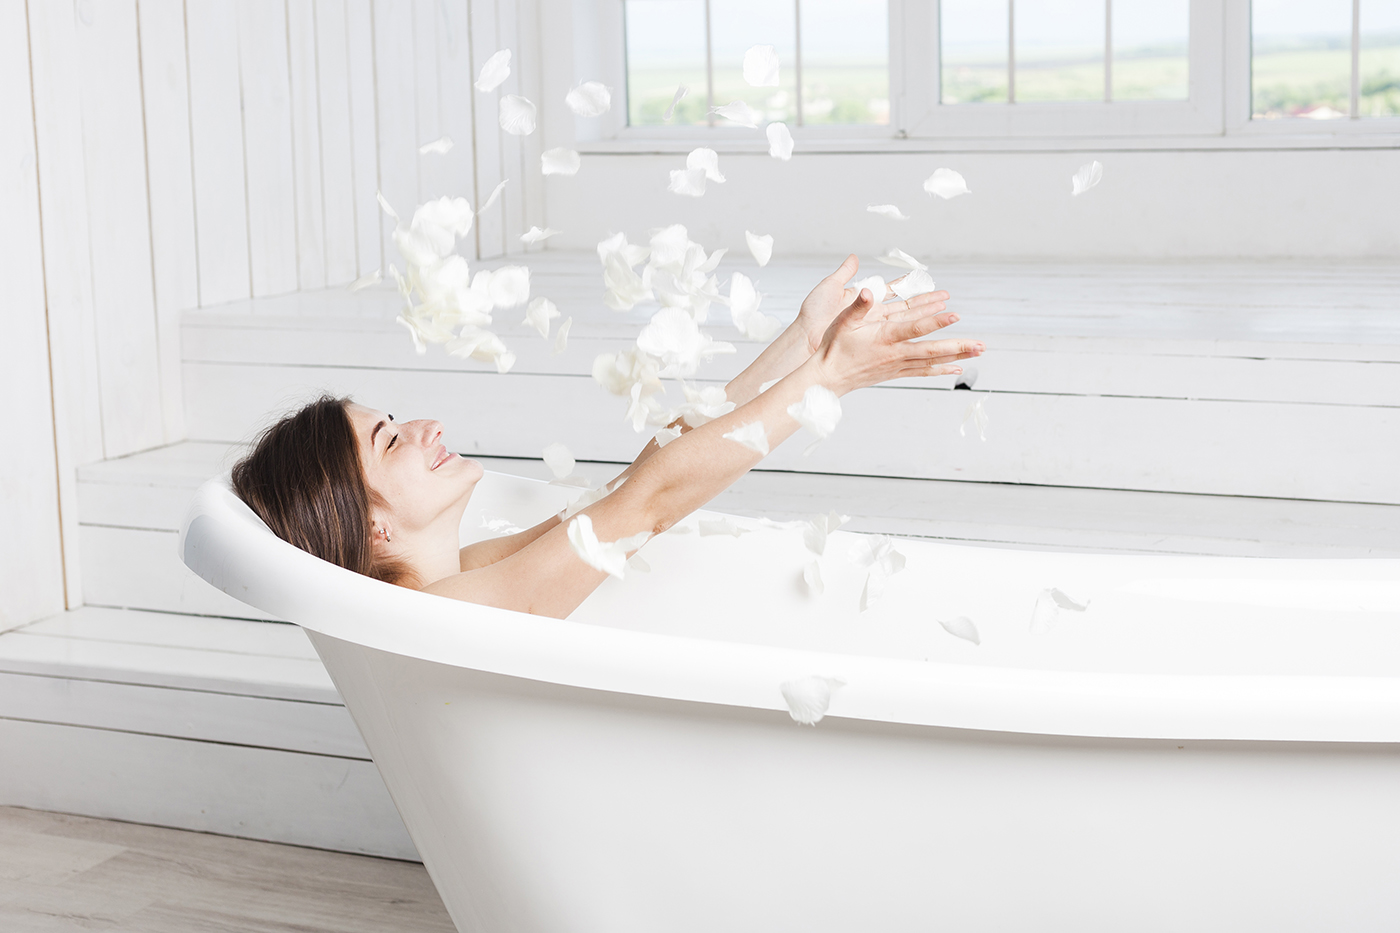 Bubble bath using tankless hot water heater on Mother's Day